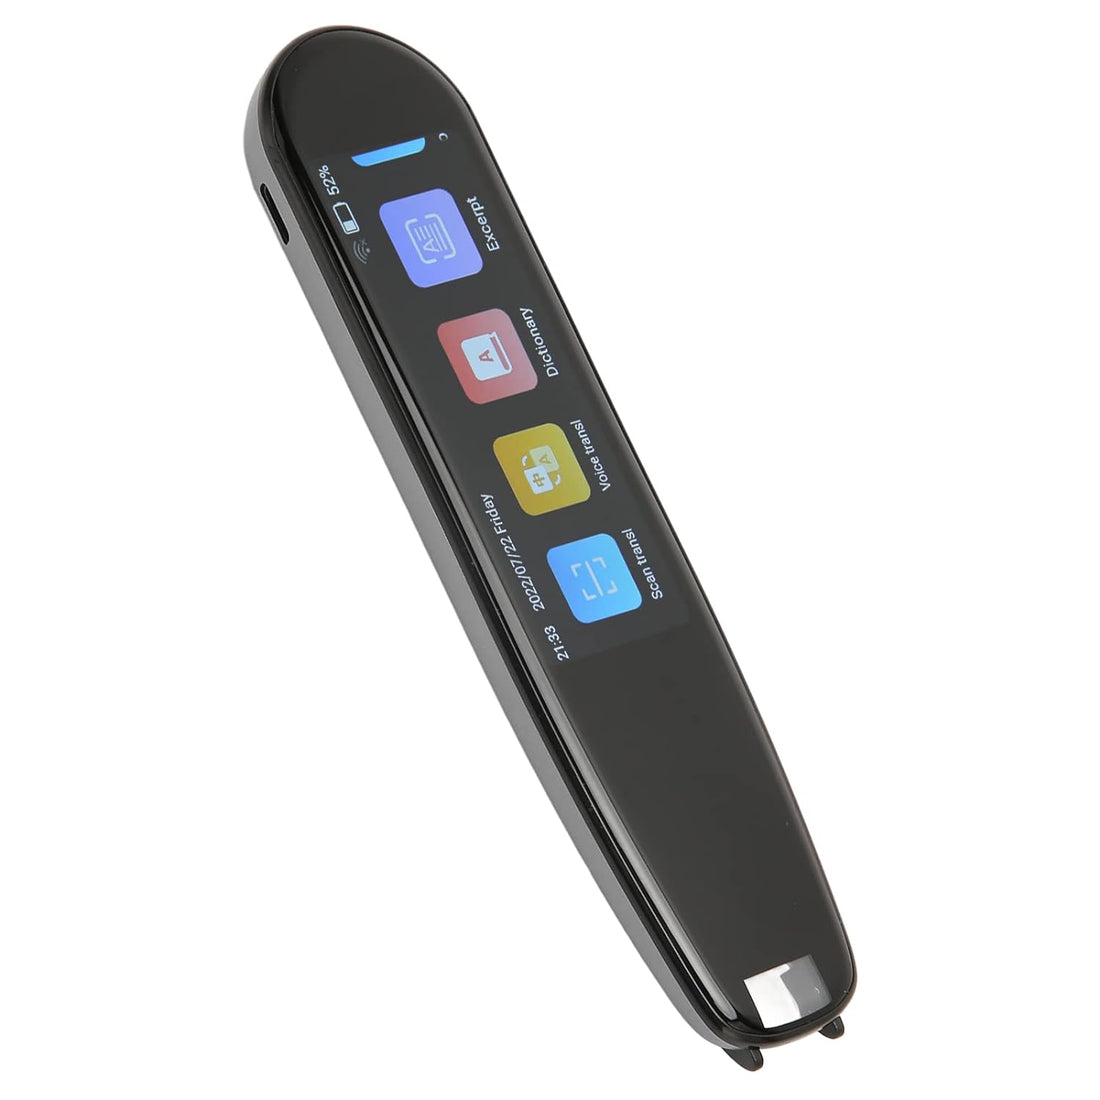 Translator Device, 111 Language Dictionary Translator Scanning Pen with 2.99in Touch Screen, Portable Voice Translation Pen Reader, Text Excerpt, for Business Learning Travelling